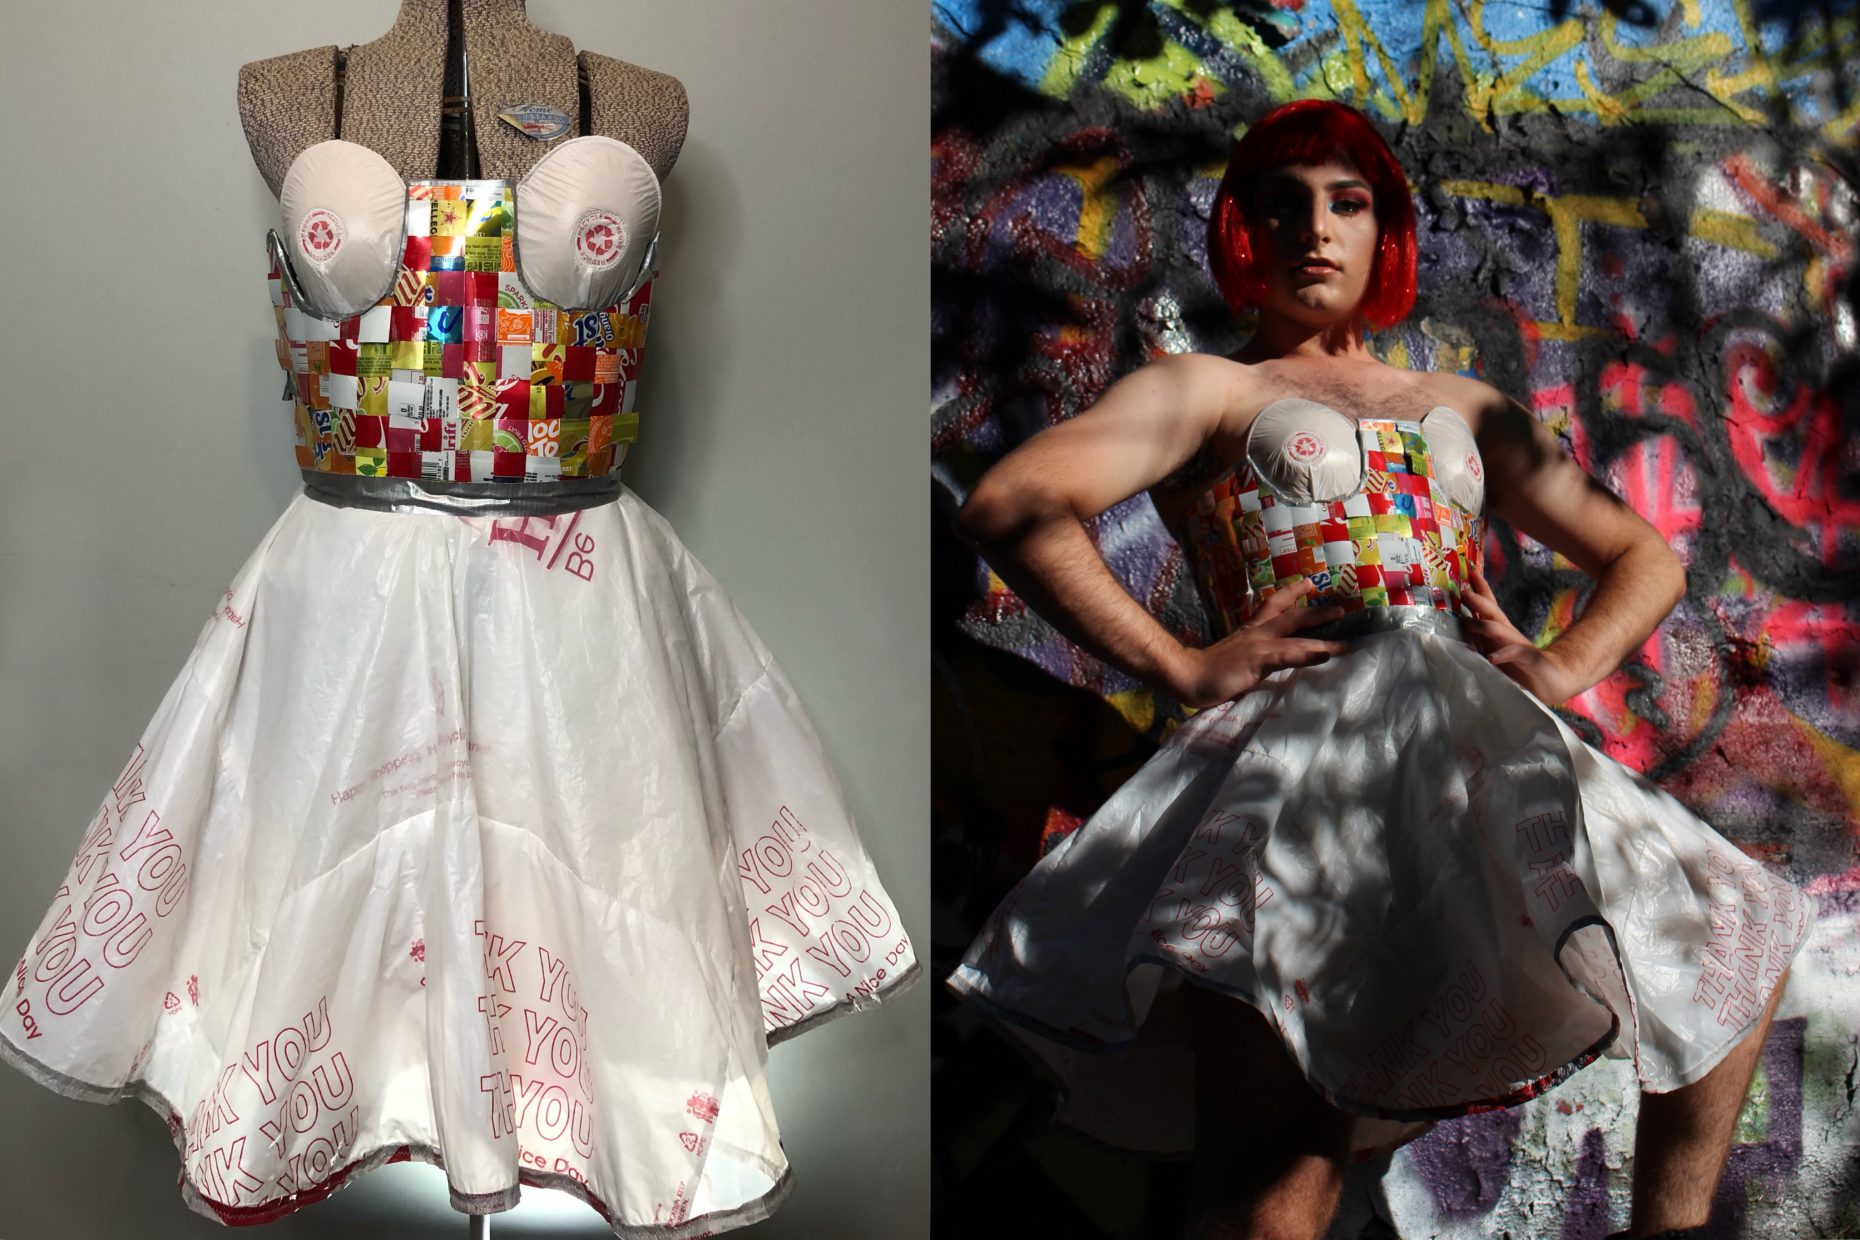 SWANCC shows off fashions made from garbage